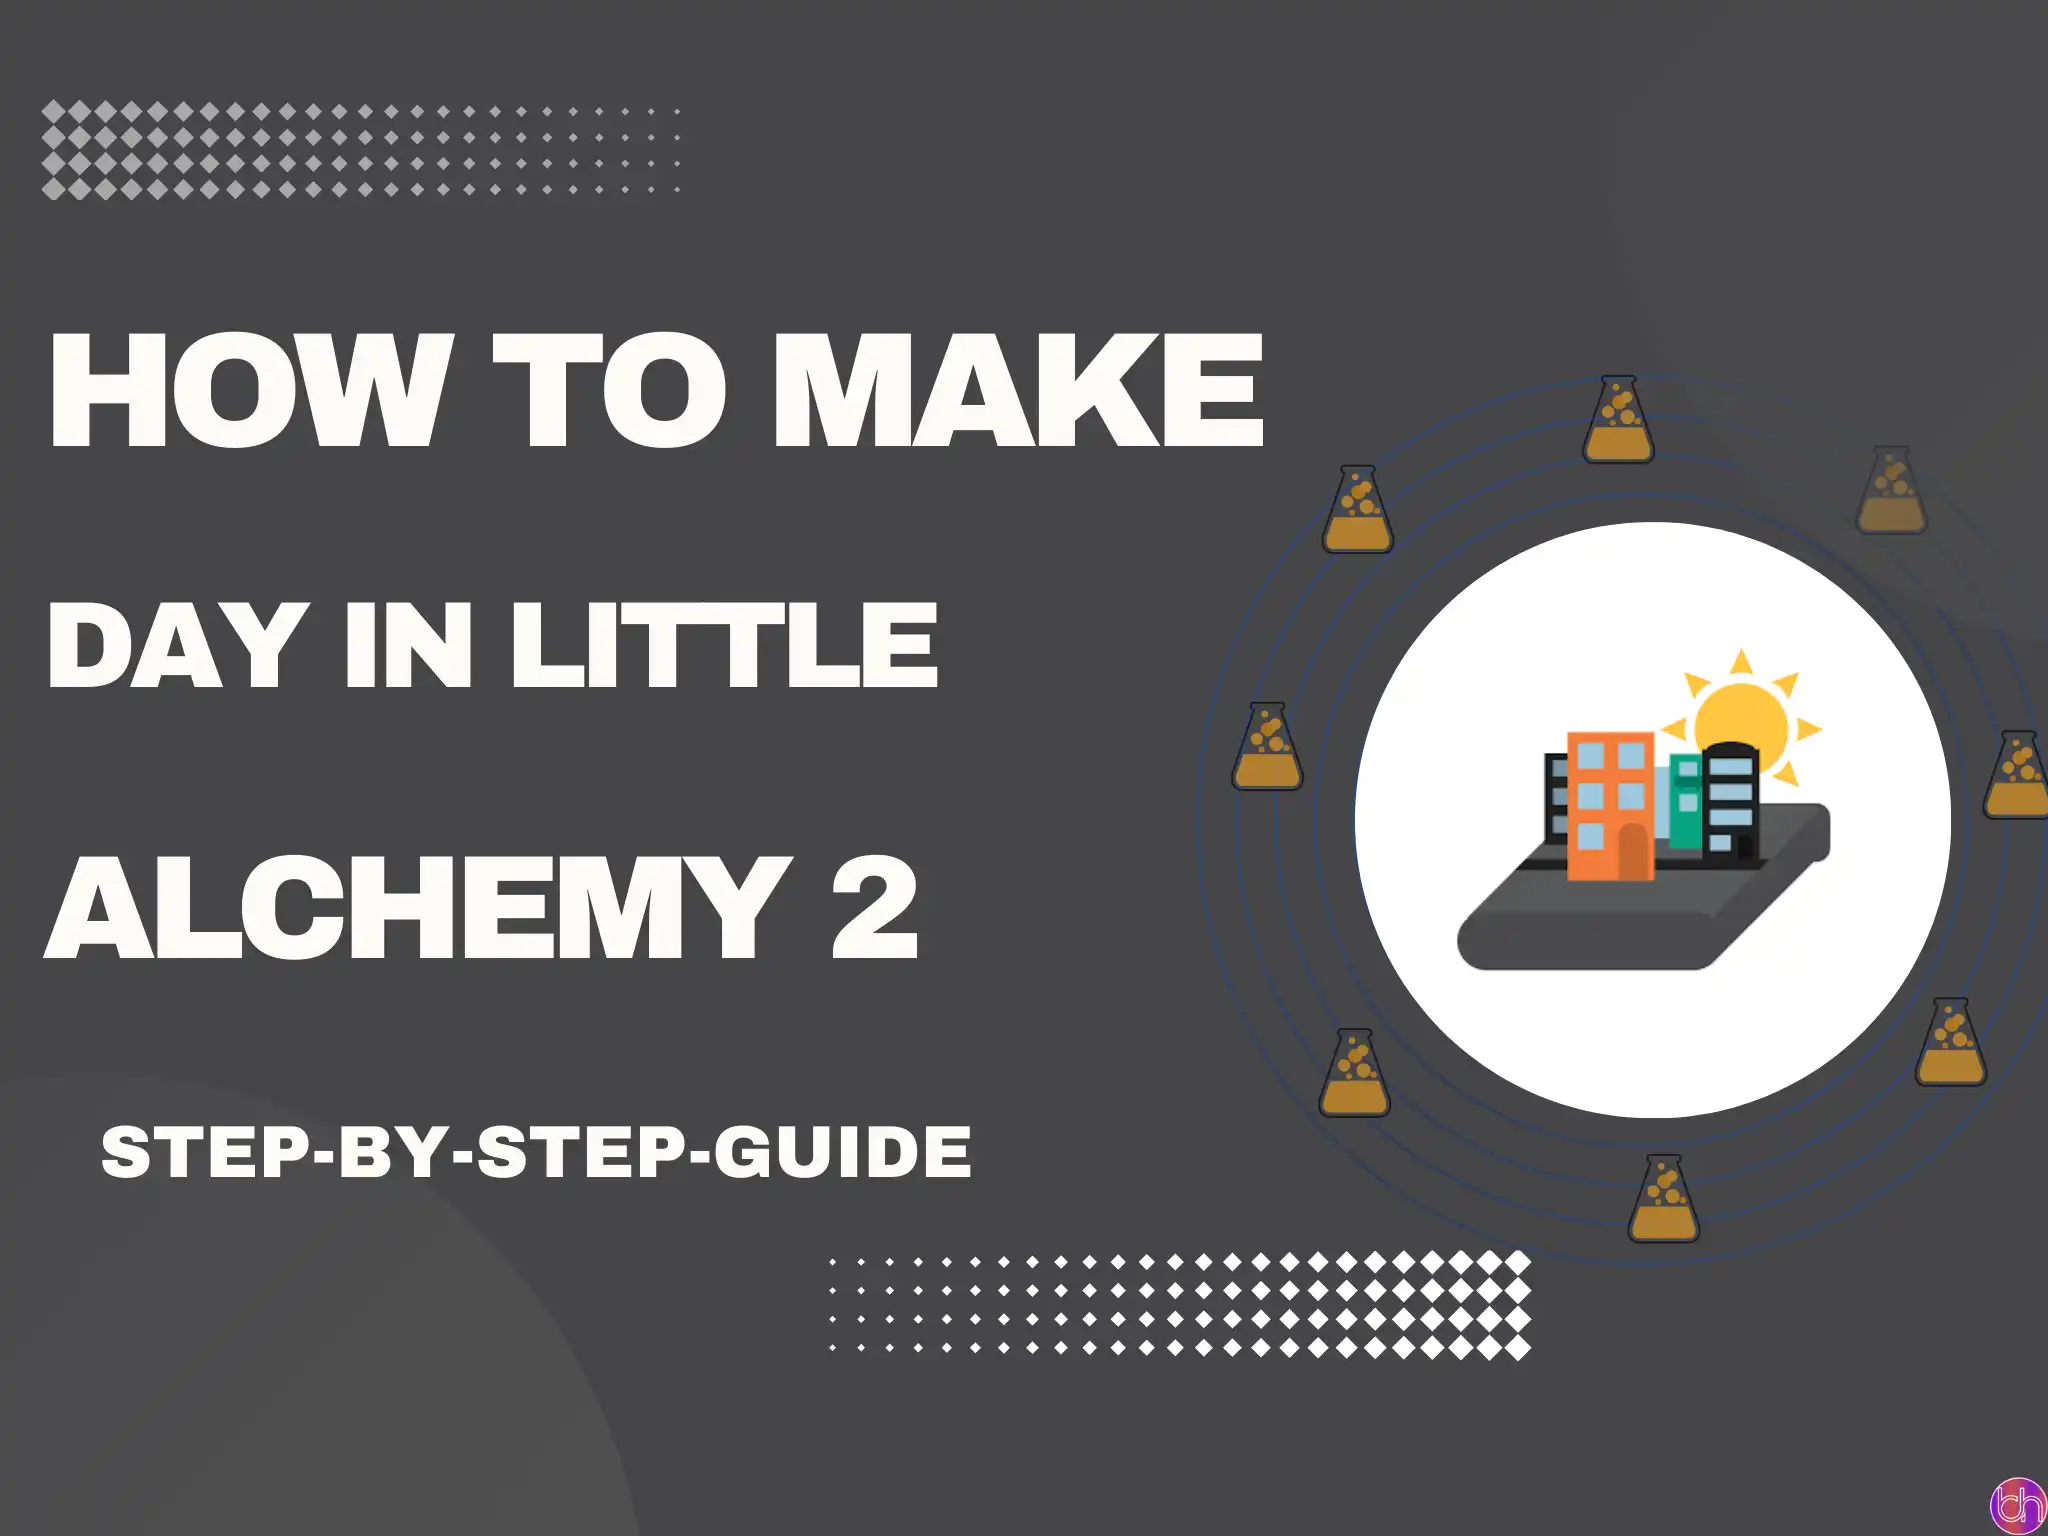 How to make Day in Little Alchemy 2